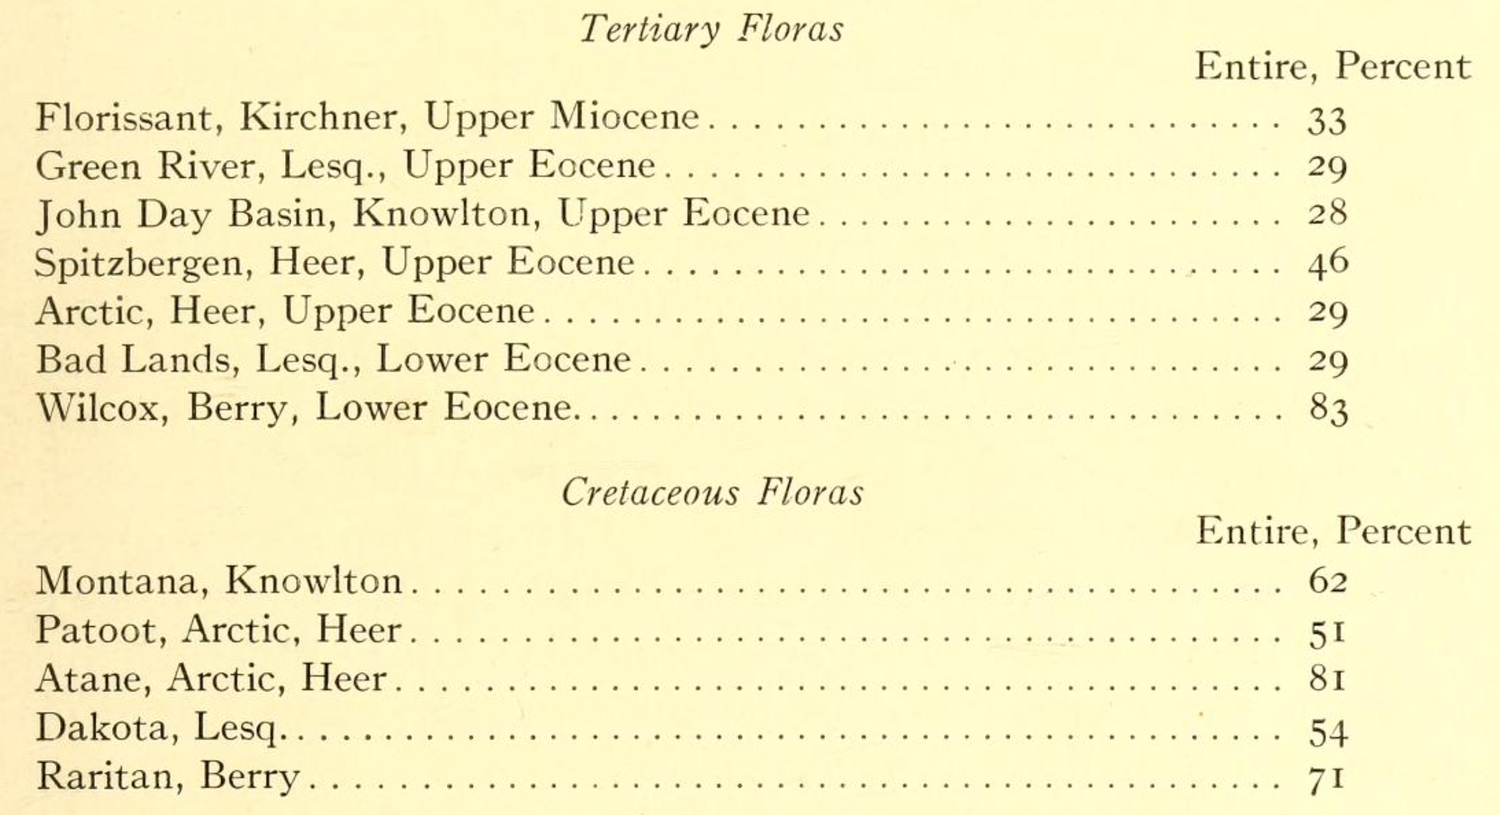 Percent entire-margined wood dicot species from fossil floras from Bailey & Sinnott (1916). This table shows the percent entire-margined woody dicot species from fossil floras in the Cretaceous and Tertiary (Paleogene–Neogene).